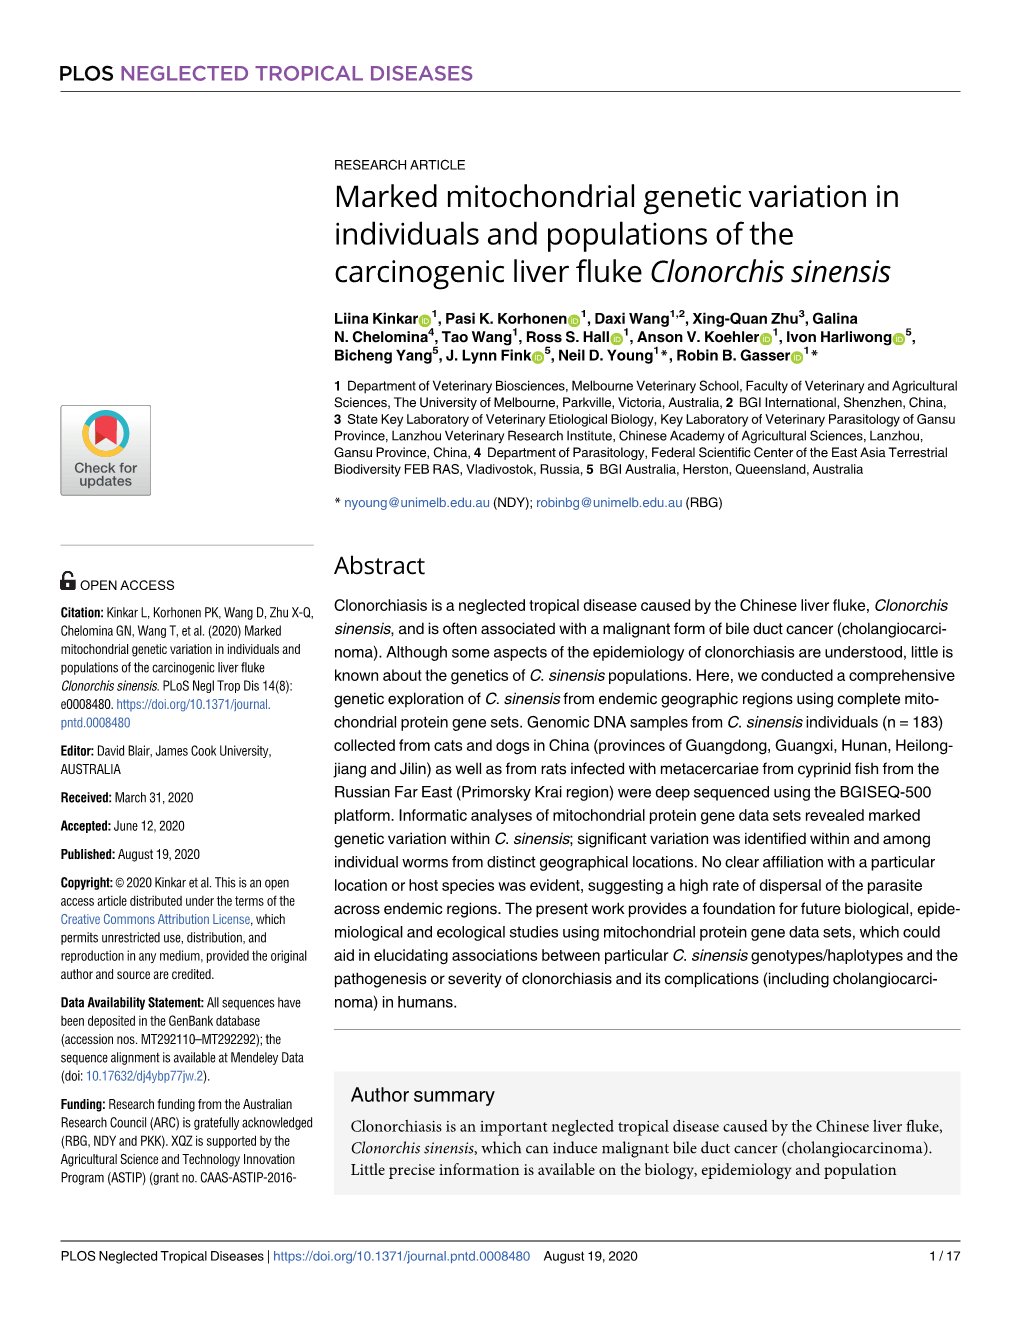 Marked Mitochondrial Genetic Variation in Individuals and Populations of the Carcinogenic Liver Fluke Clonorchis Sinensis